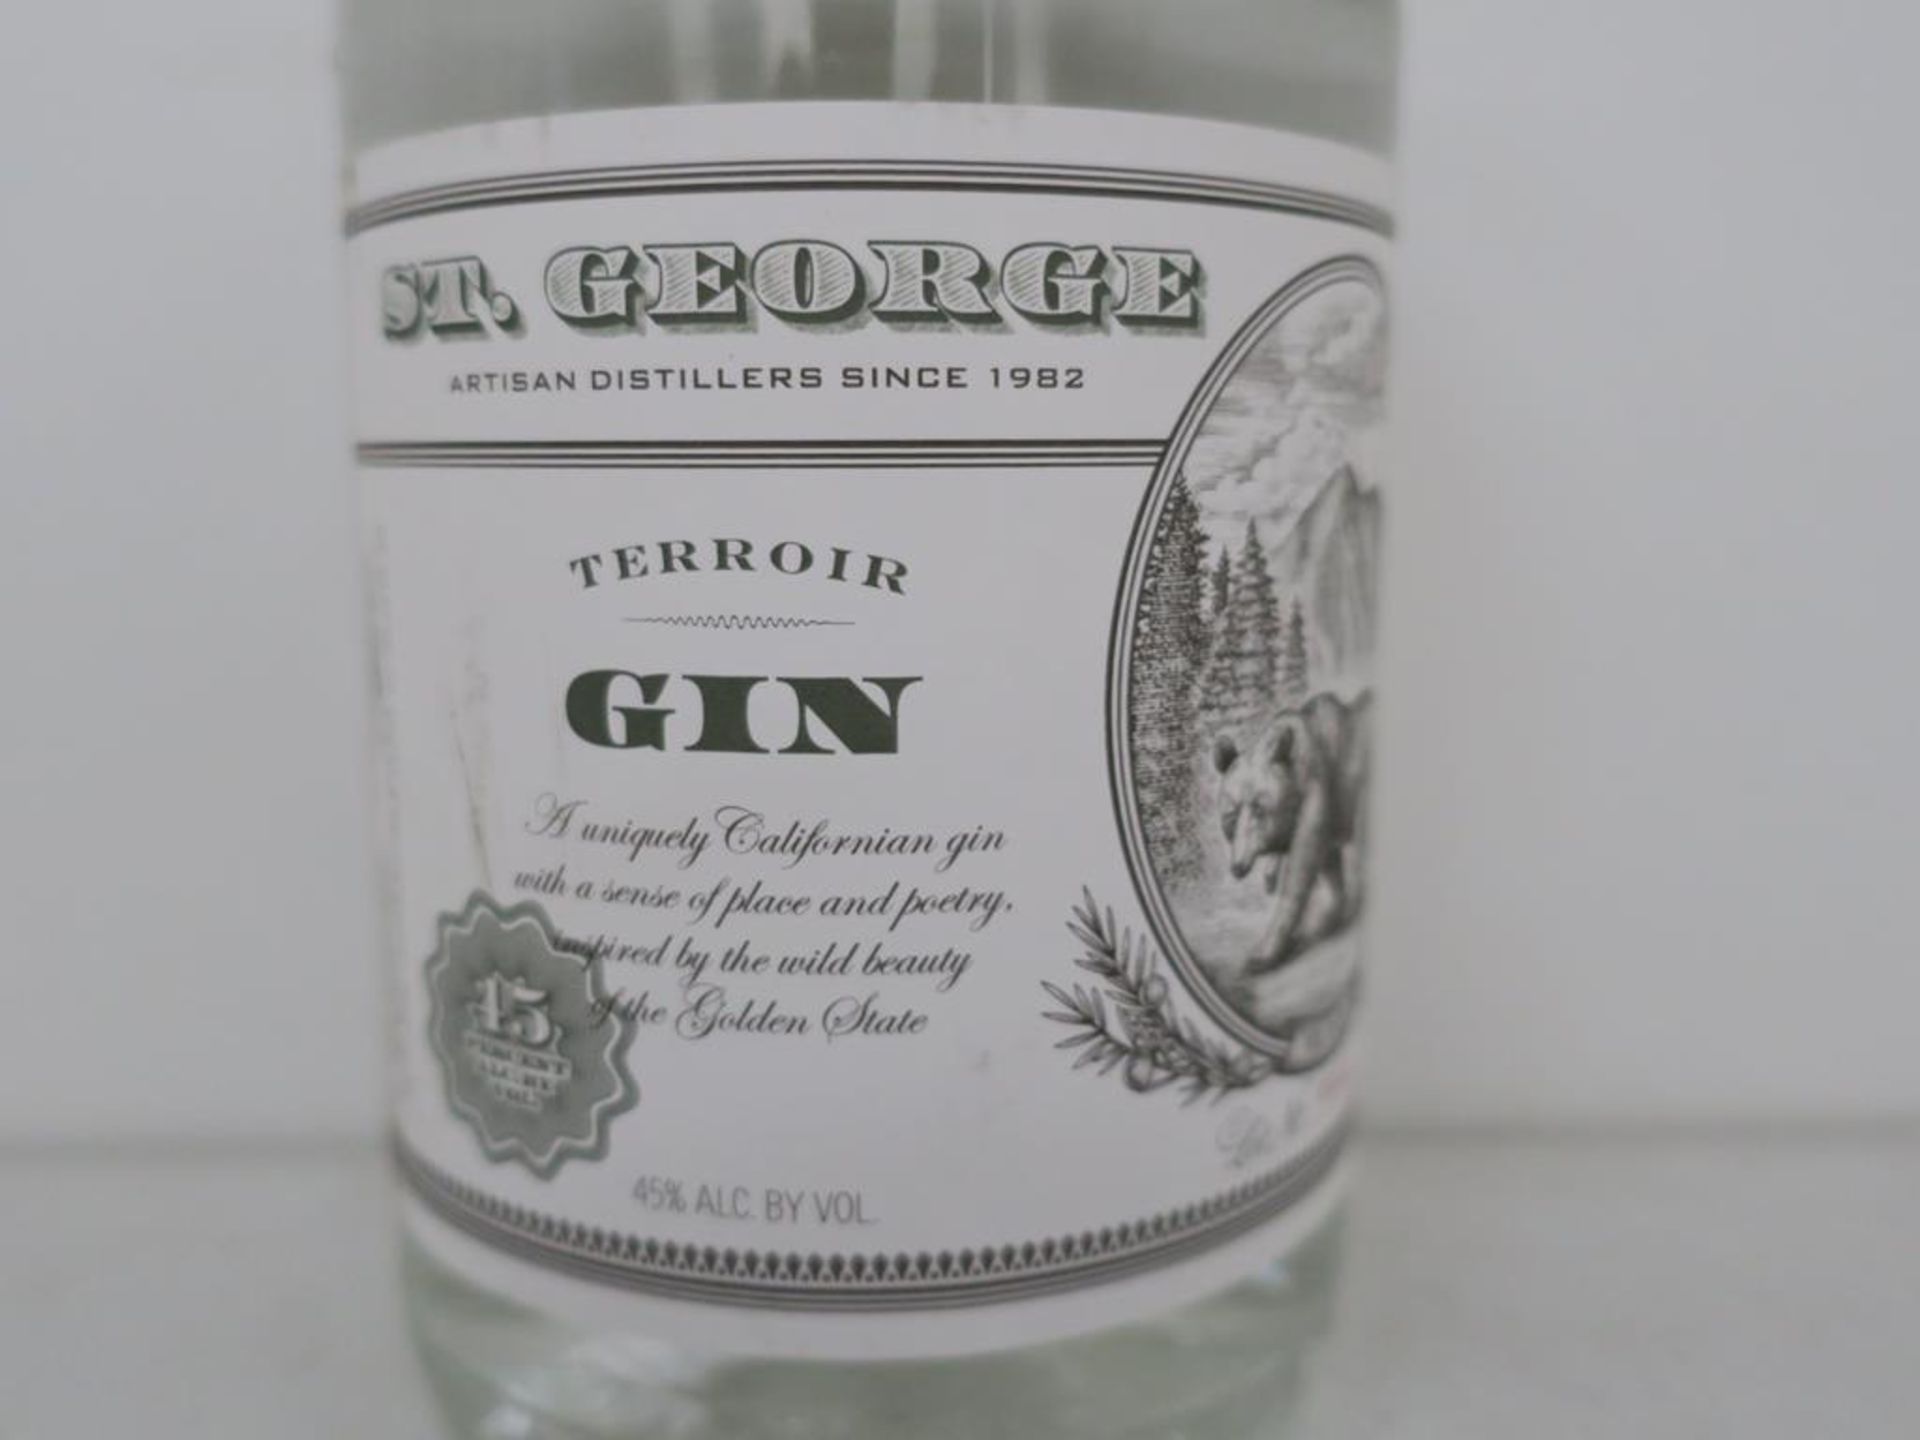 * Three bottles of Gin: a 70cl bottle of Porters Gin 41.5% vol, a 70cl bottle of St George Terroir - Image 6 of 7